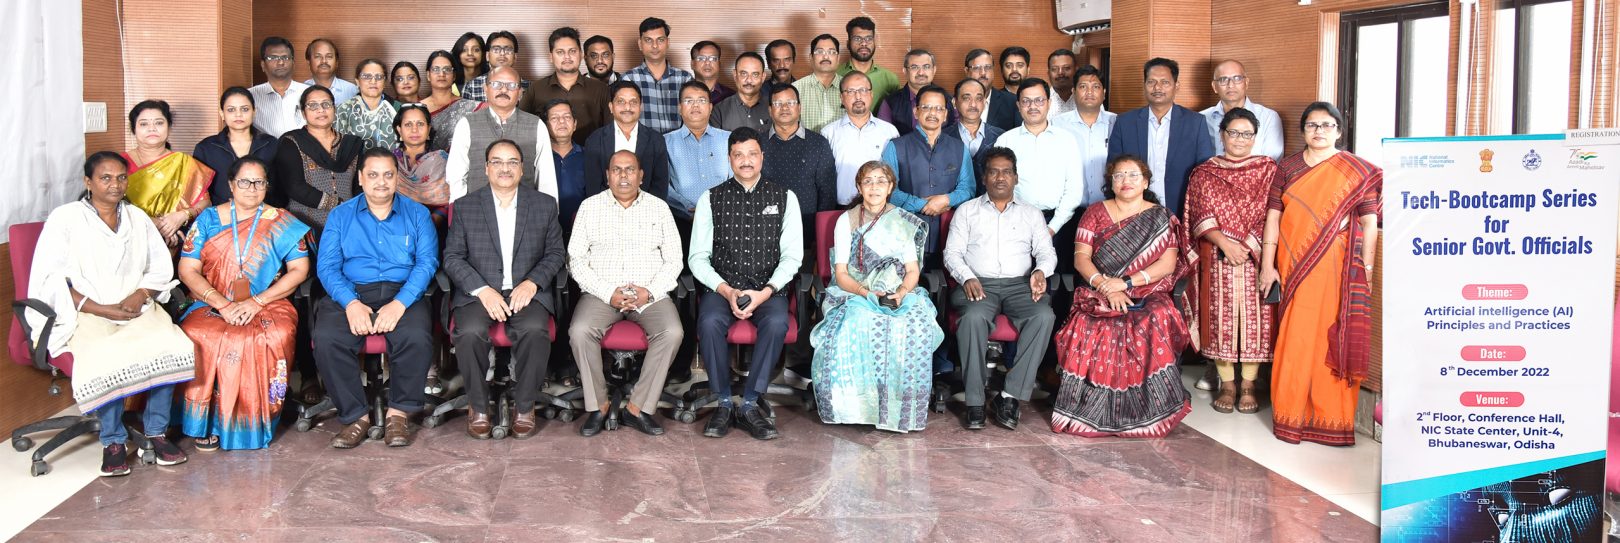 Senior Officers of Government participated in the Tech-Bootcamp on Artificial Intelligence (AI) – Principles and Practices.